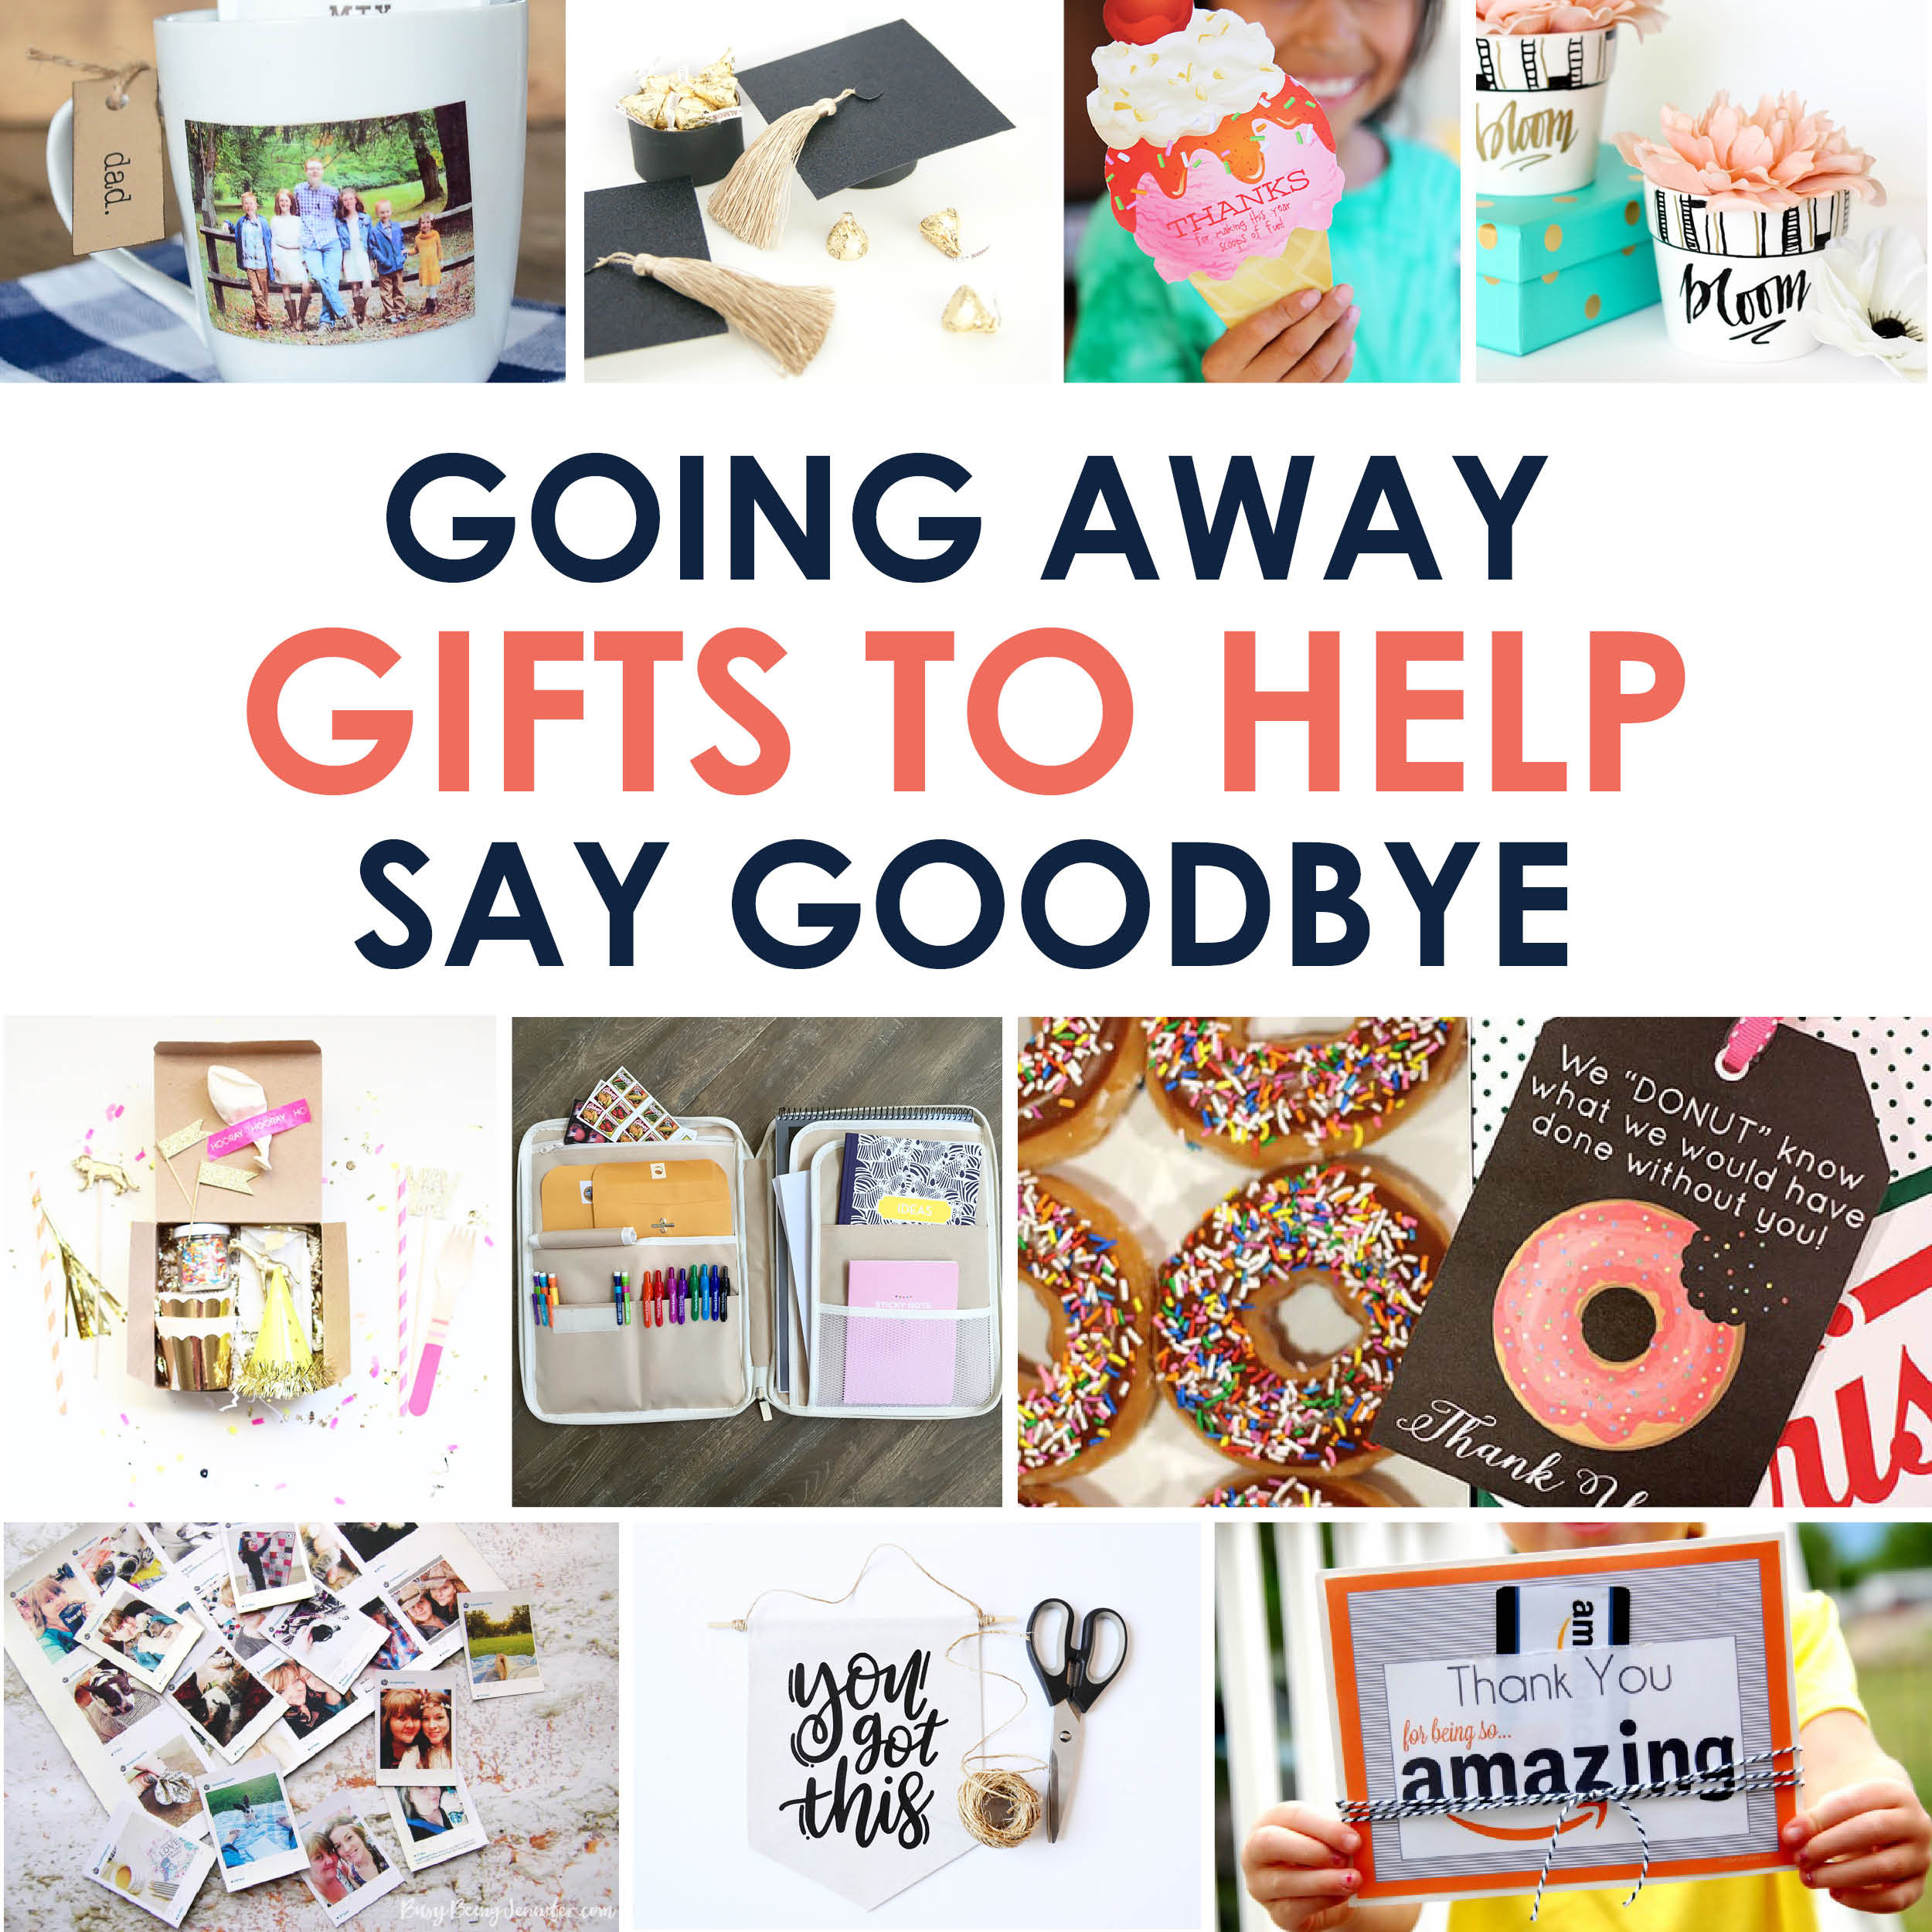 Going Away Gift Ideas For Girlfriend
 Going Away Gifts to Help Say Goodbye